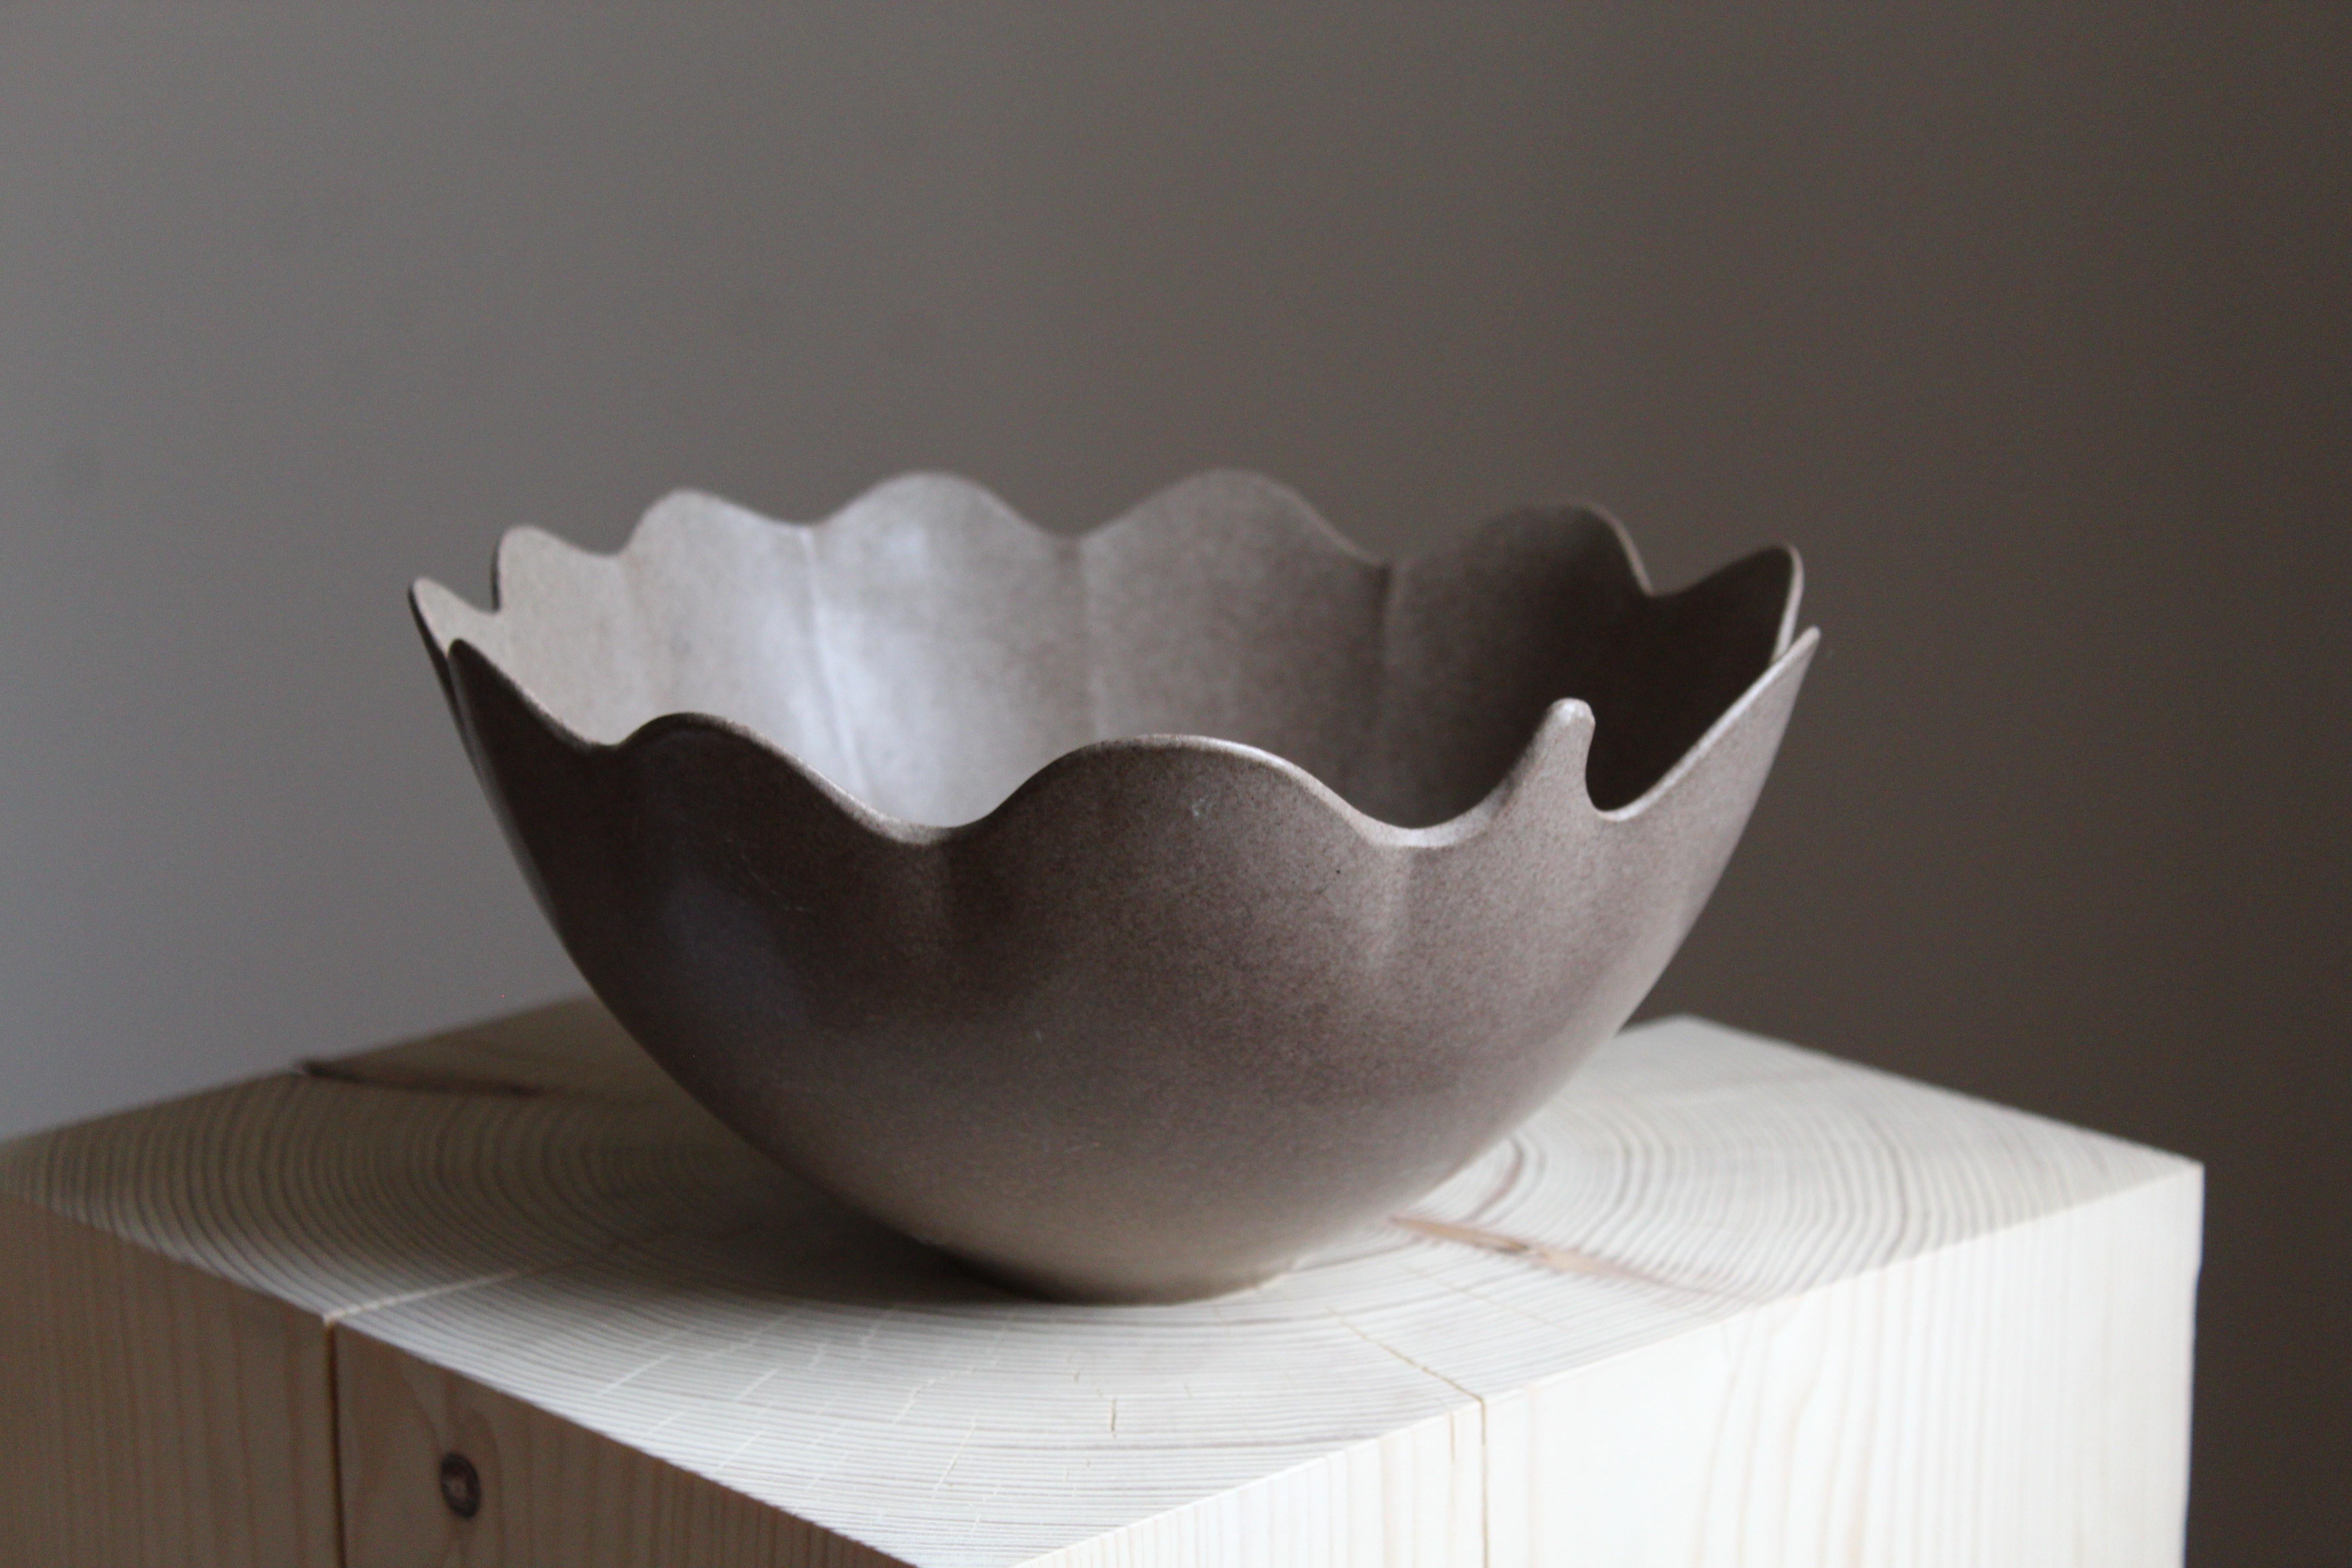 An organically shaped stoneware bowl by Gabi Citron Tengborg for the iconic Swedish firm Gustavsberg. 

Other ceramicists of the period include Berndt Friberg, Axel Salto, Carl-Harry Stålhane and Wilhelm Kåge.